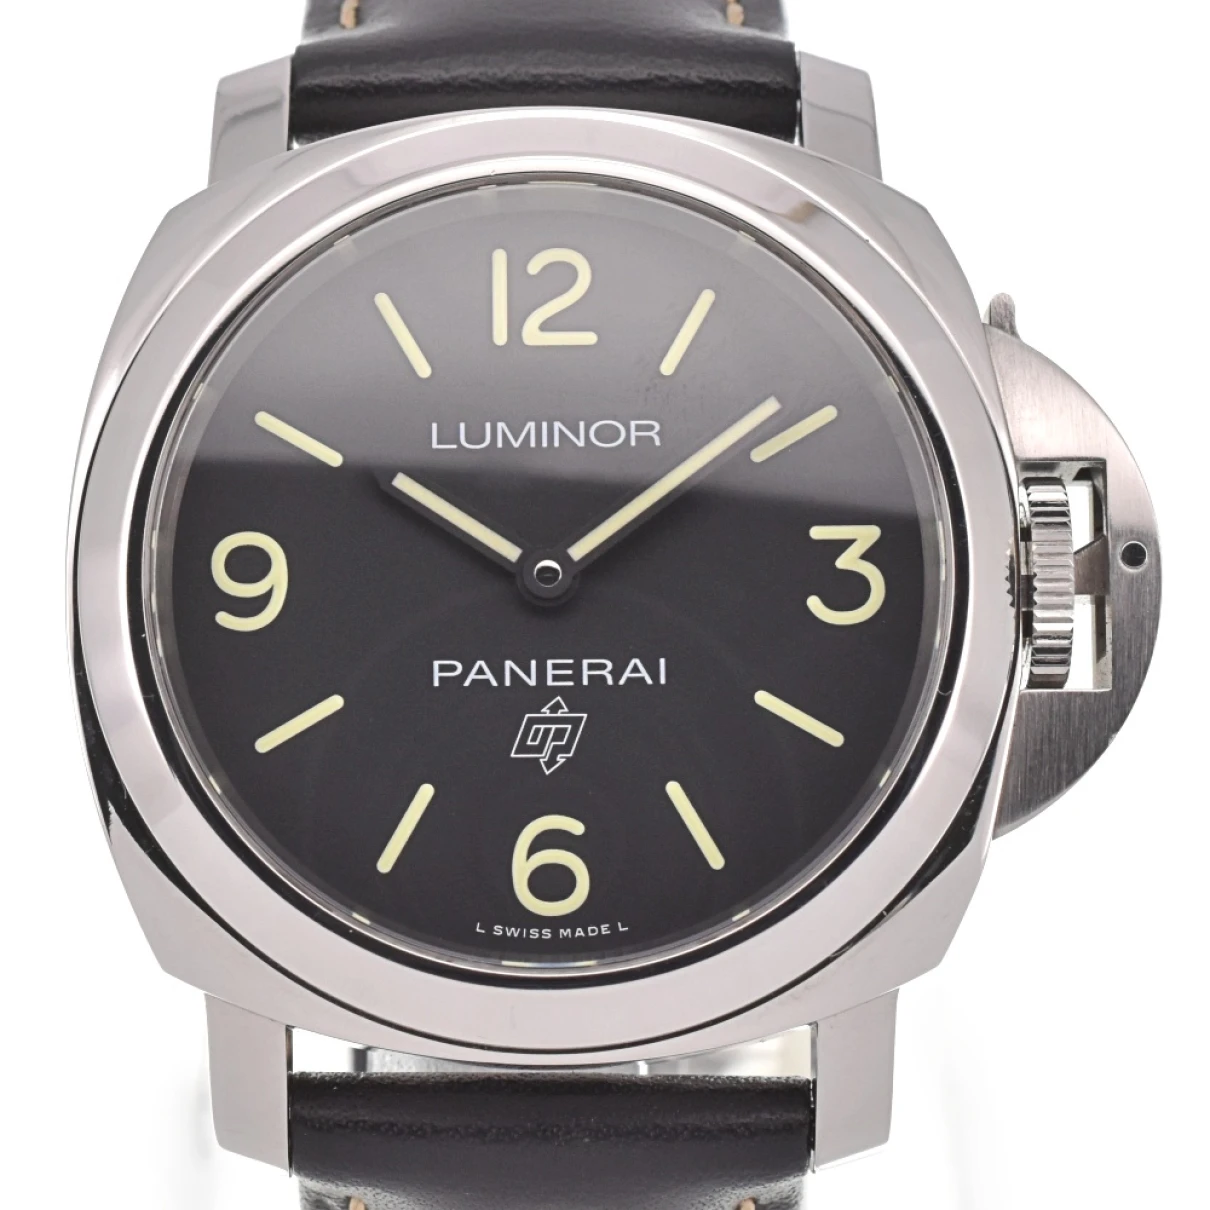 accessories Panerai watches Luminor for Male Steel. Used condition